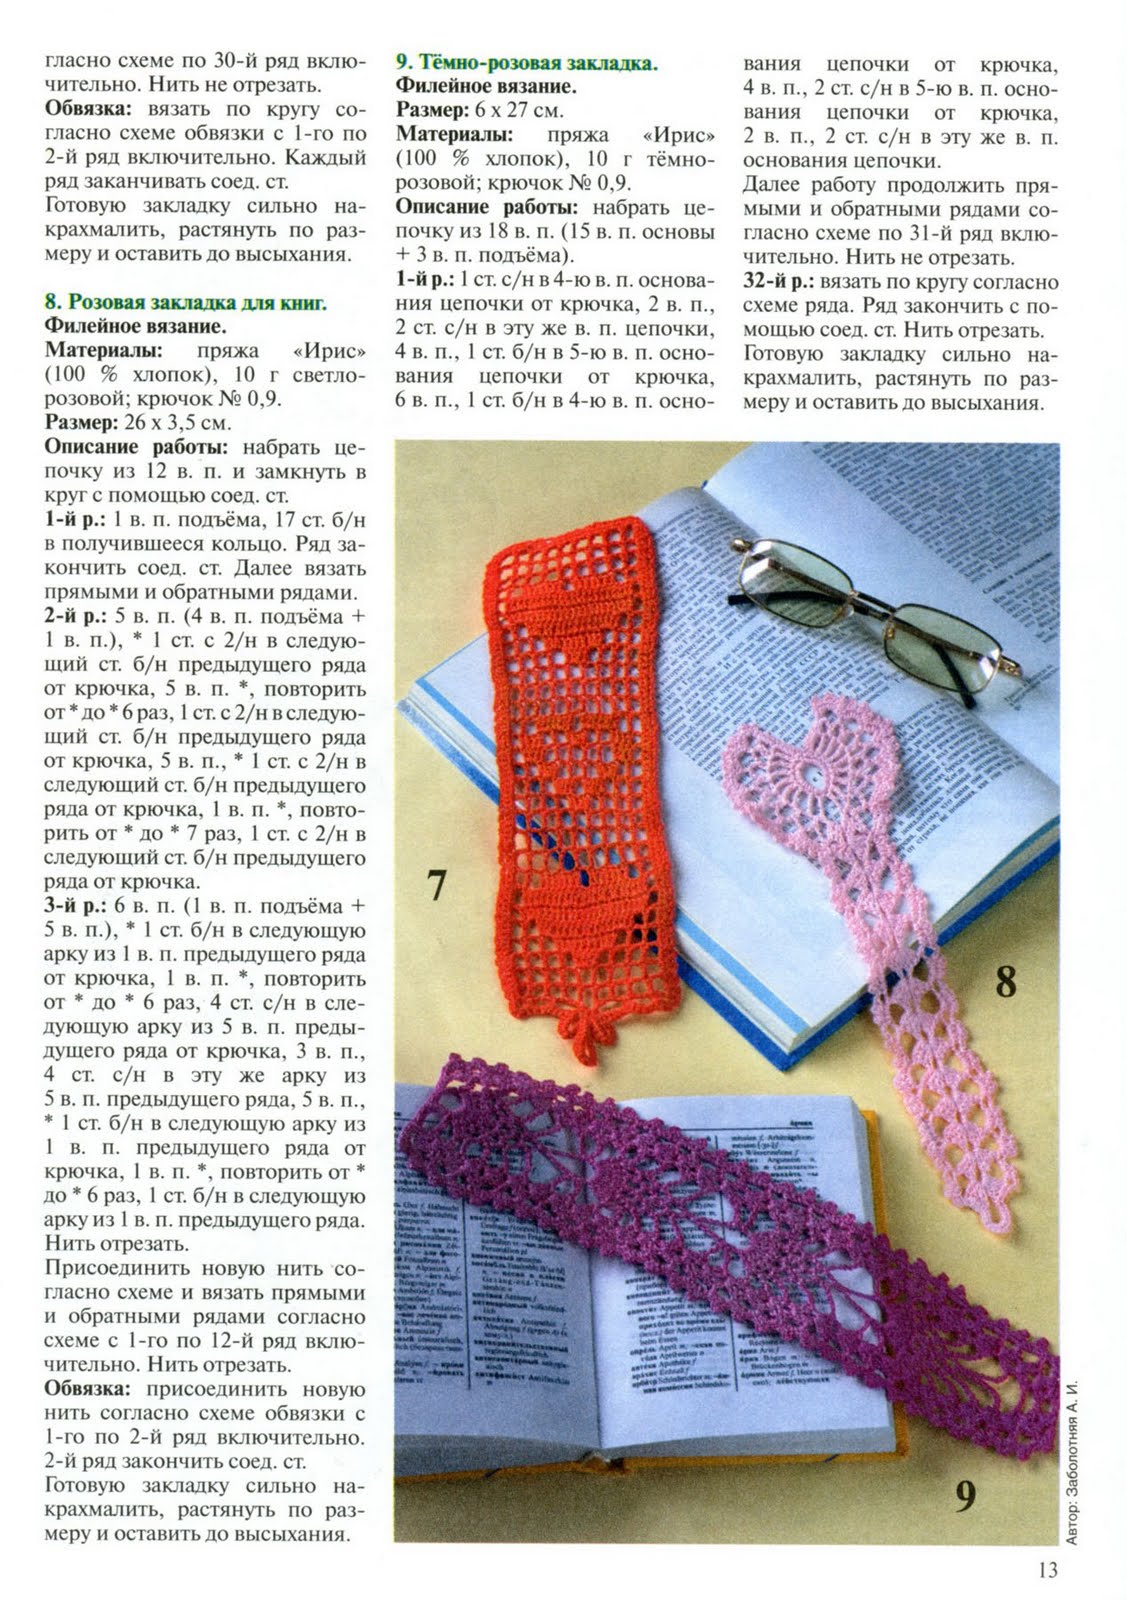 Crochet and filet bookmark (1)